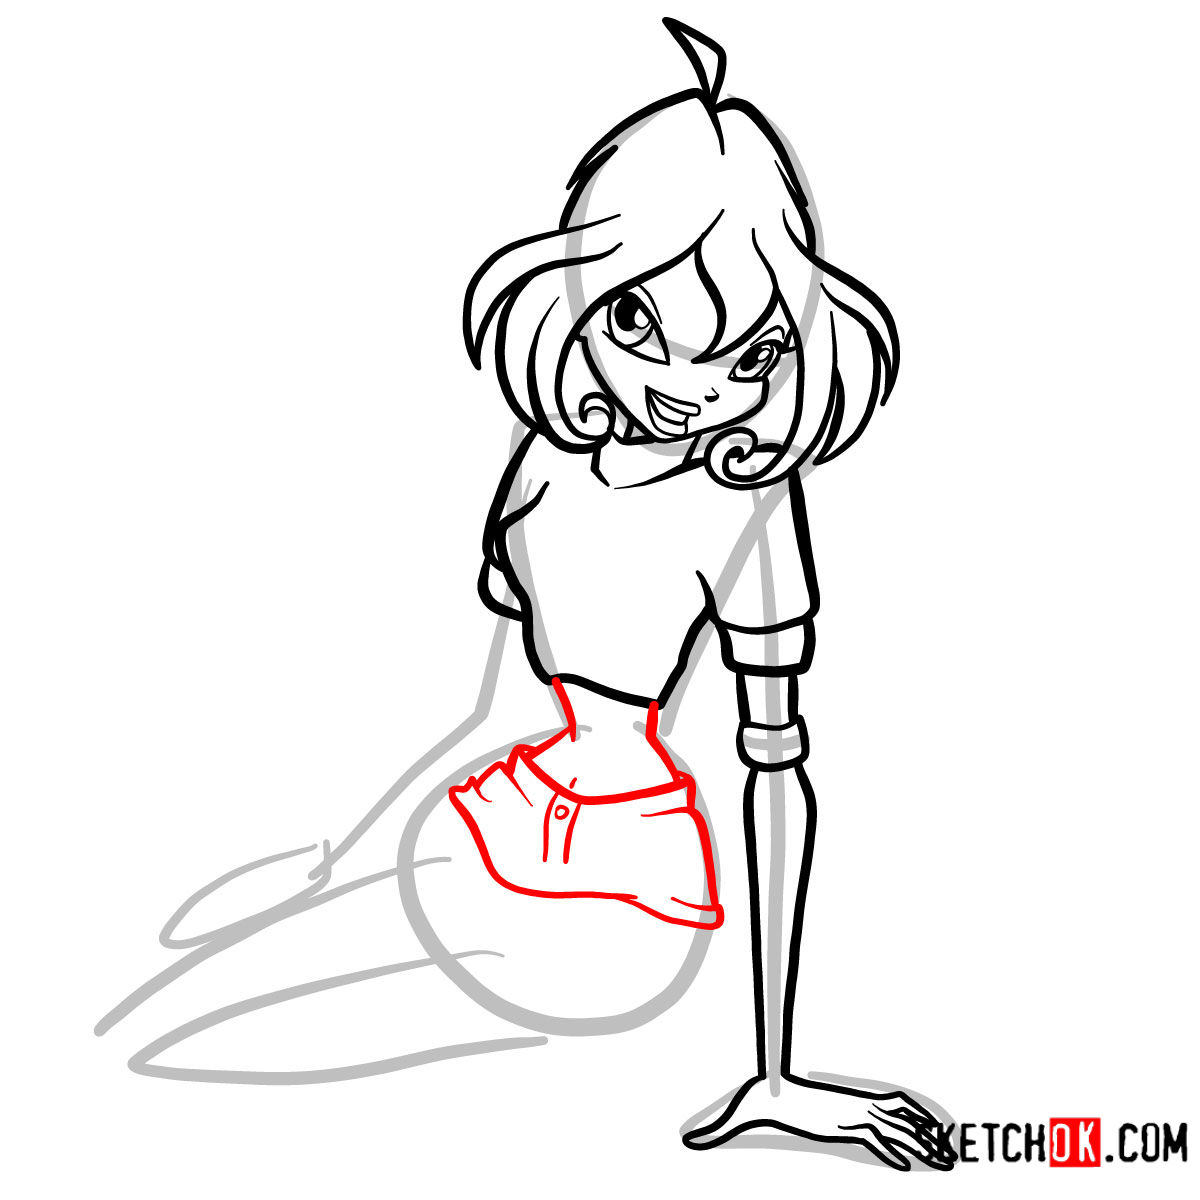 How to draw Bloom fire fairy sitting and smiling - step 07